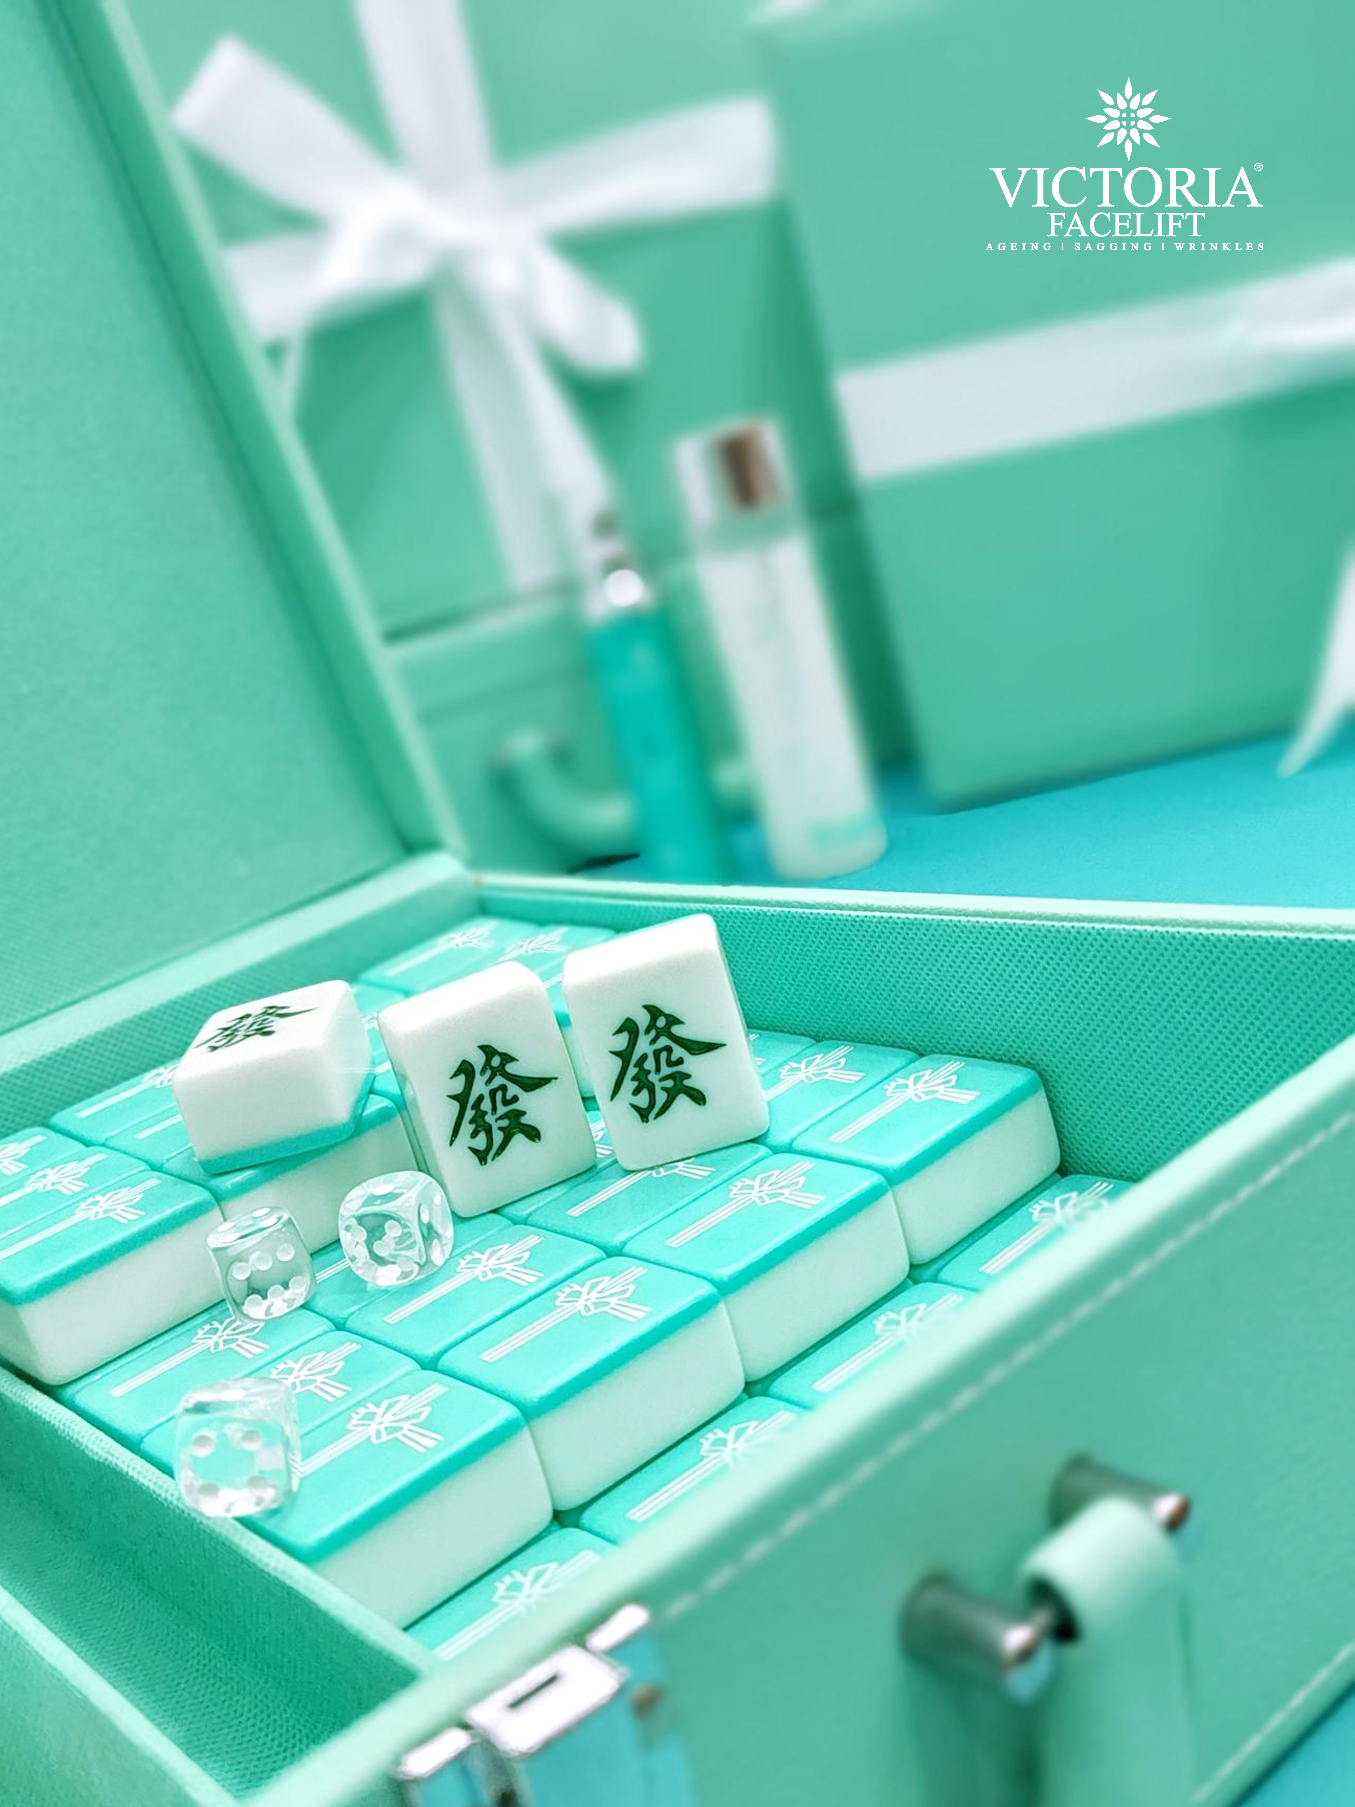 Victoria Facelift Is Giving Away An Exclusive Mahjong Set